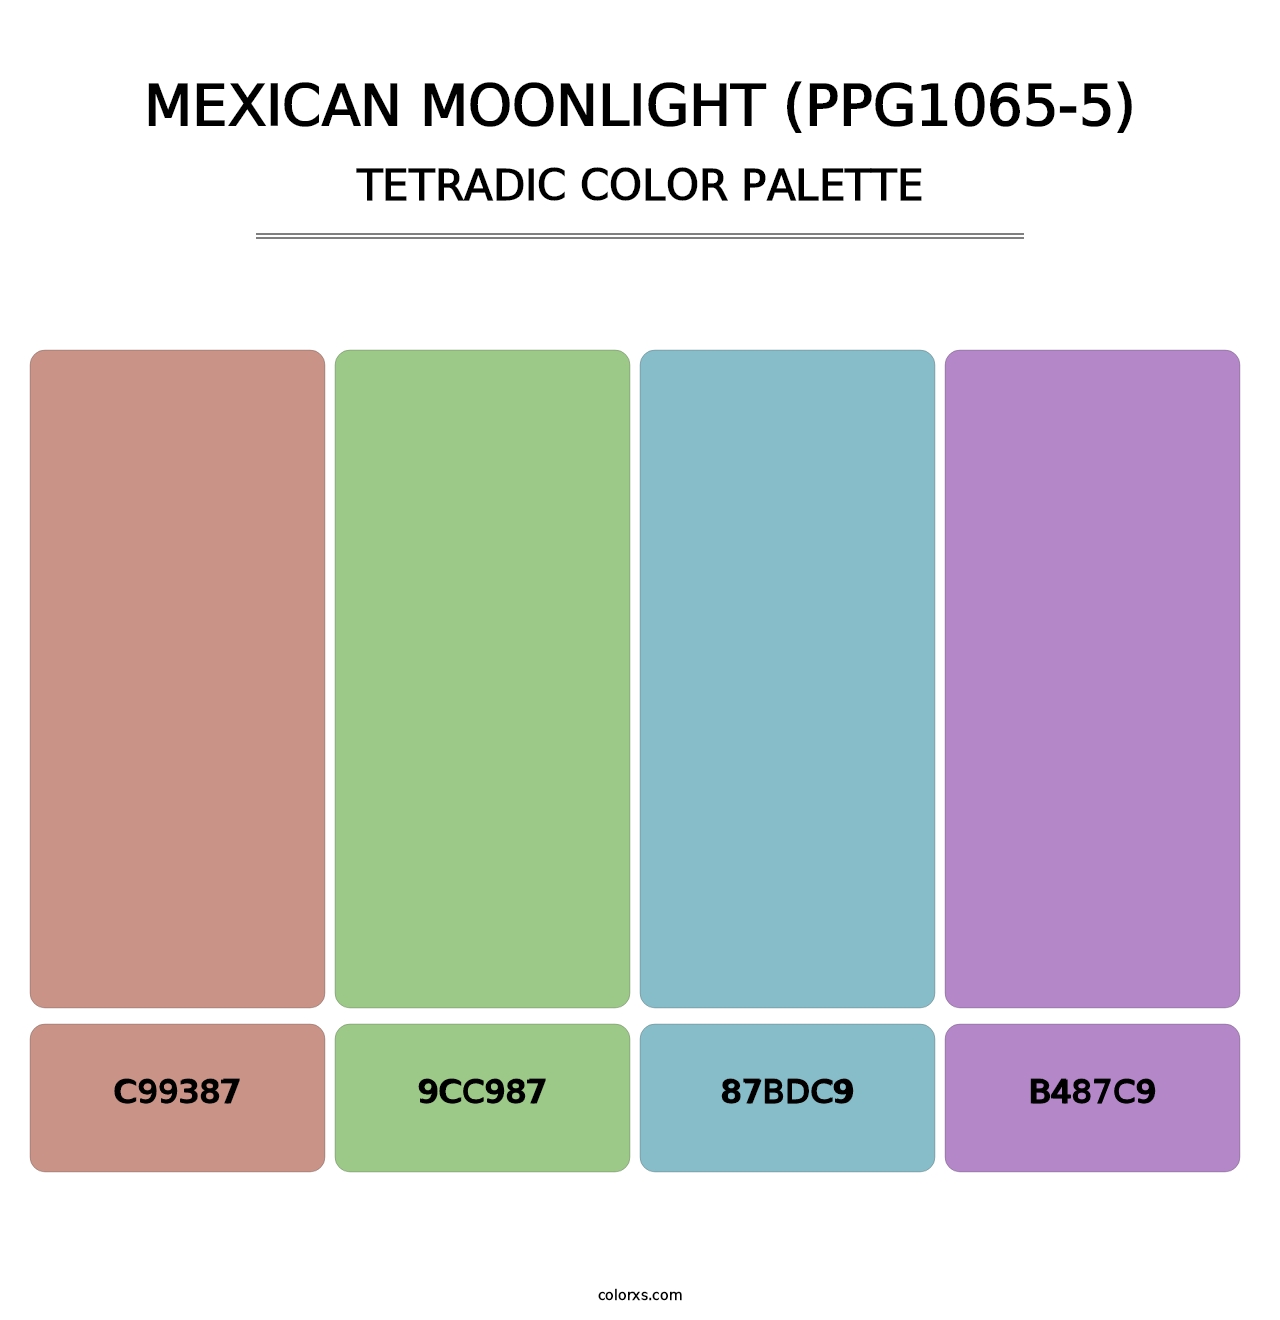 Mexican Moonlight (PPG1065-5) - Tetradic Color Palette